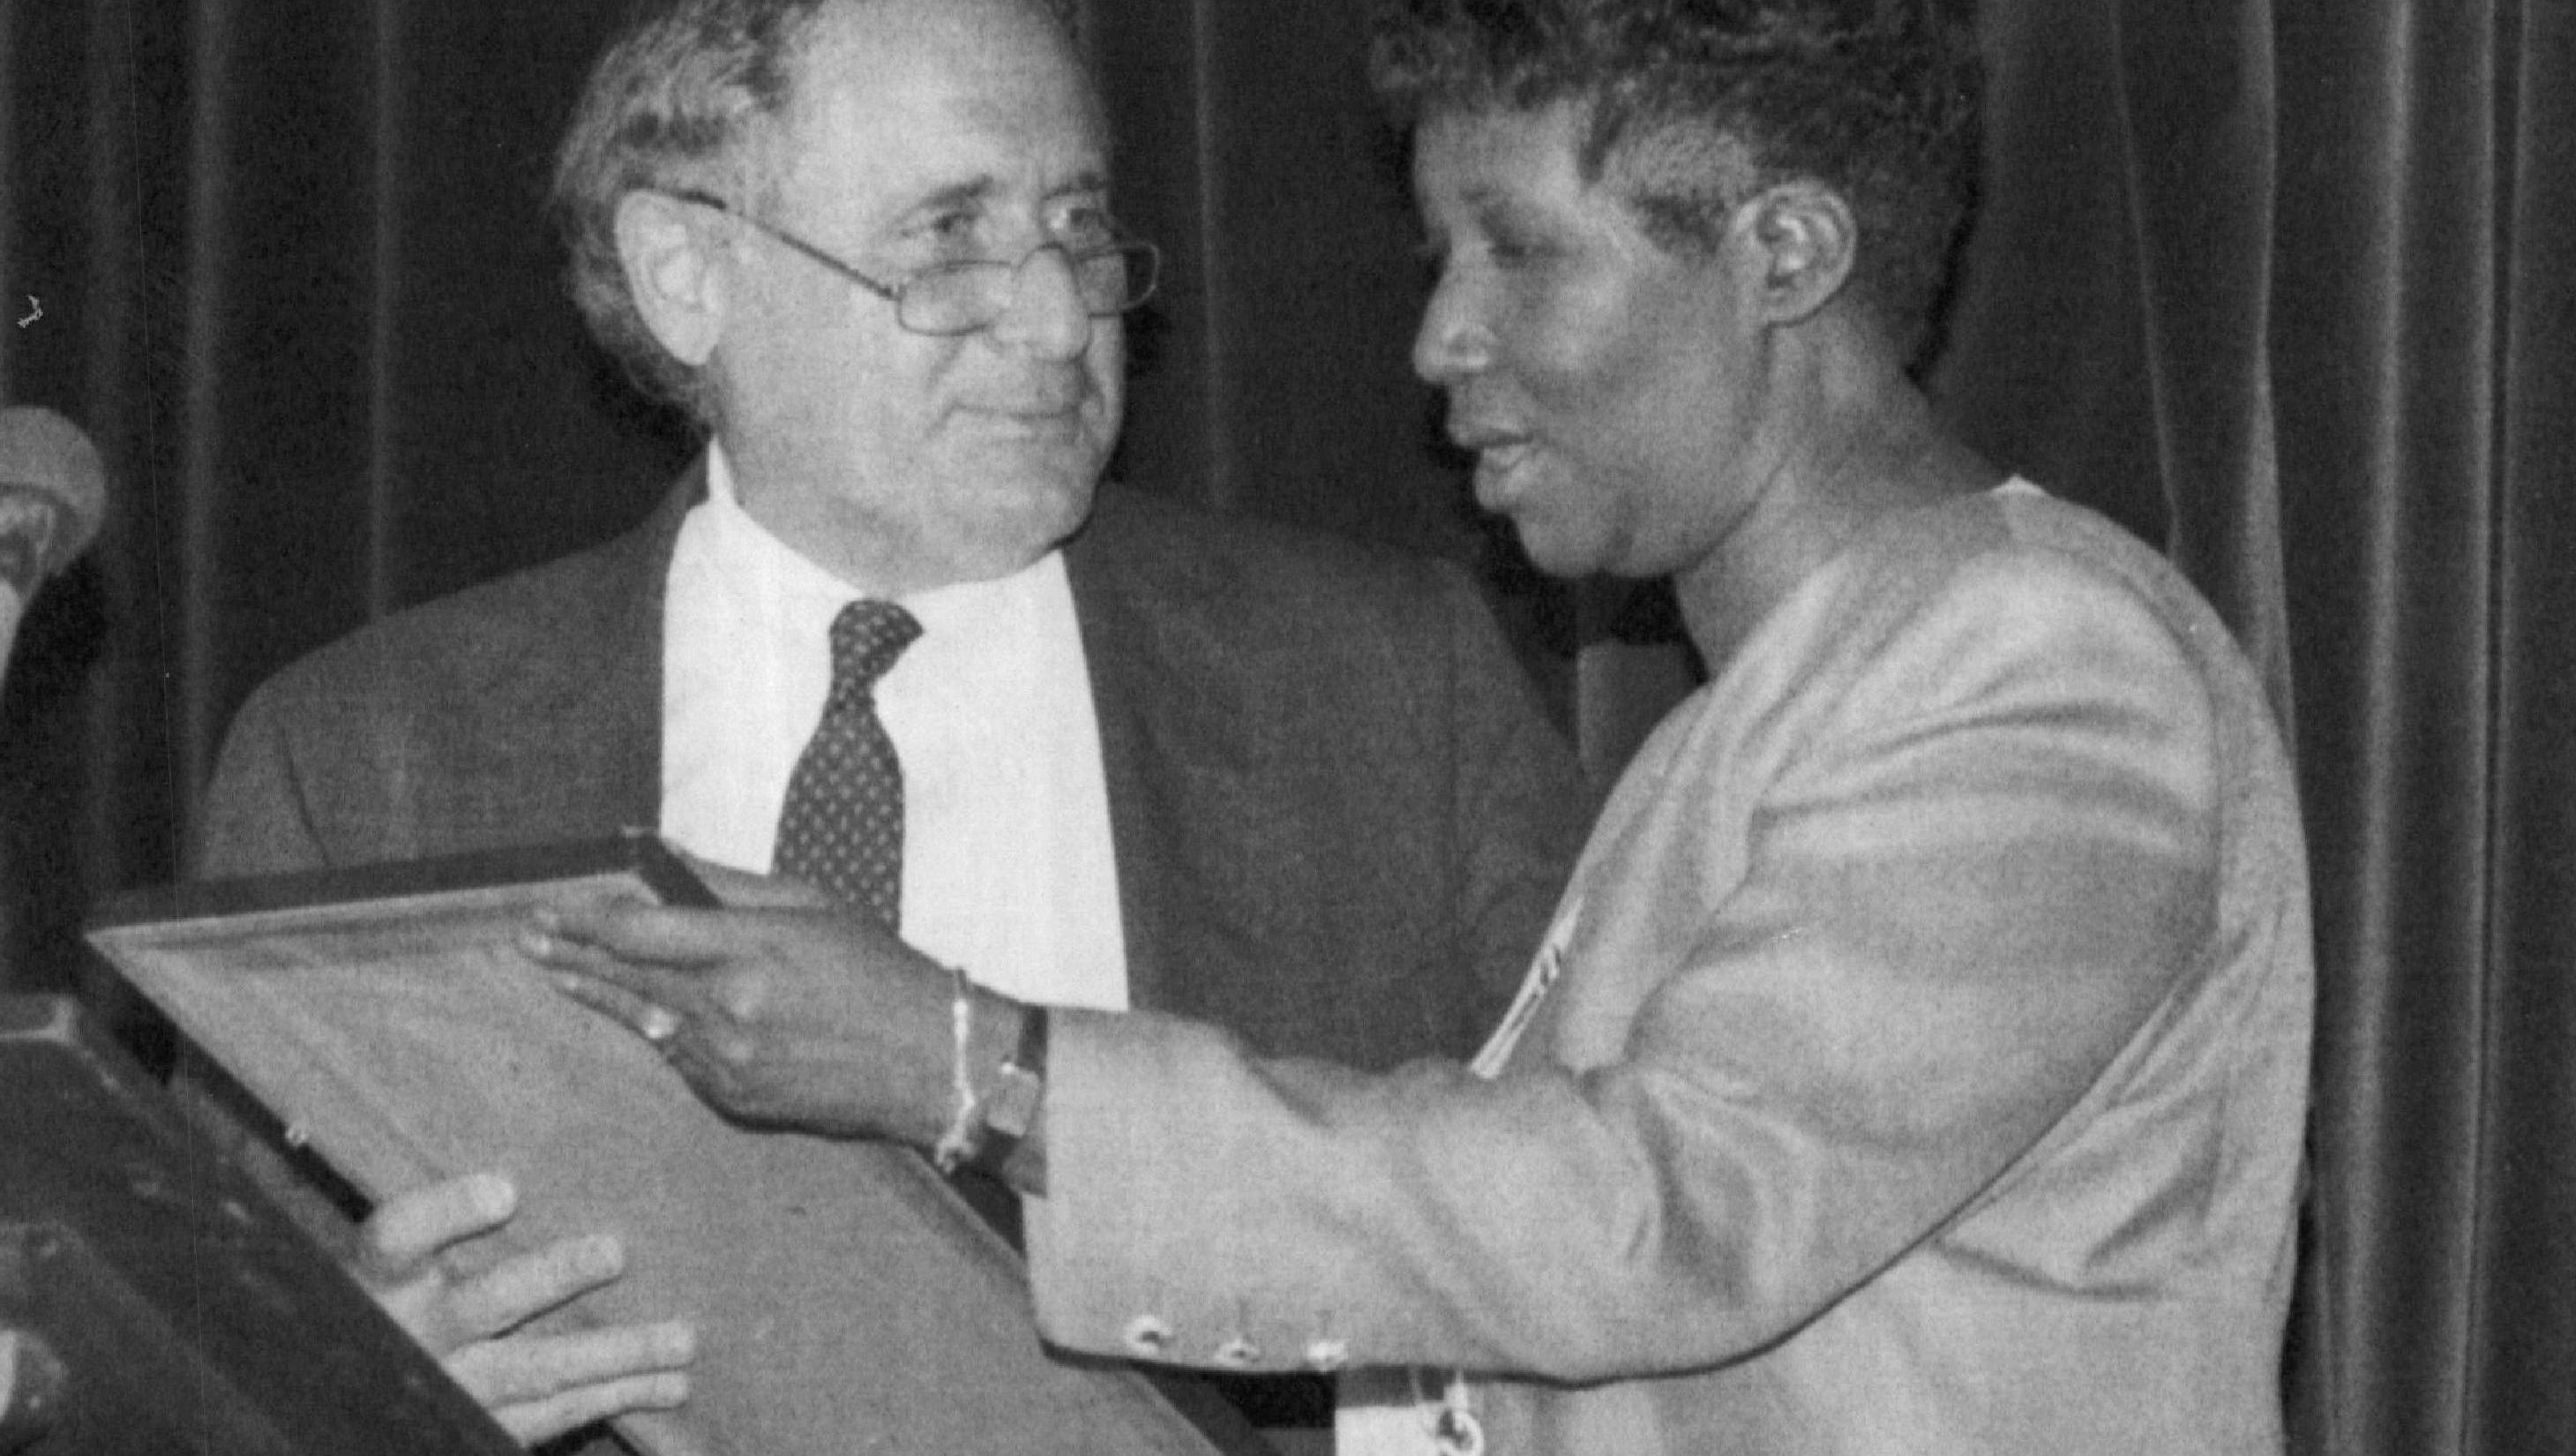 Sen. Carl Levin presents a plaque to Aretha Franklin honoring her for  contributions to American music and her efforts to combat drunk driving in 1989.